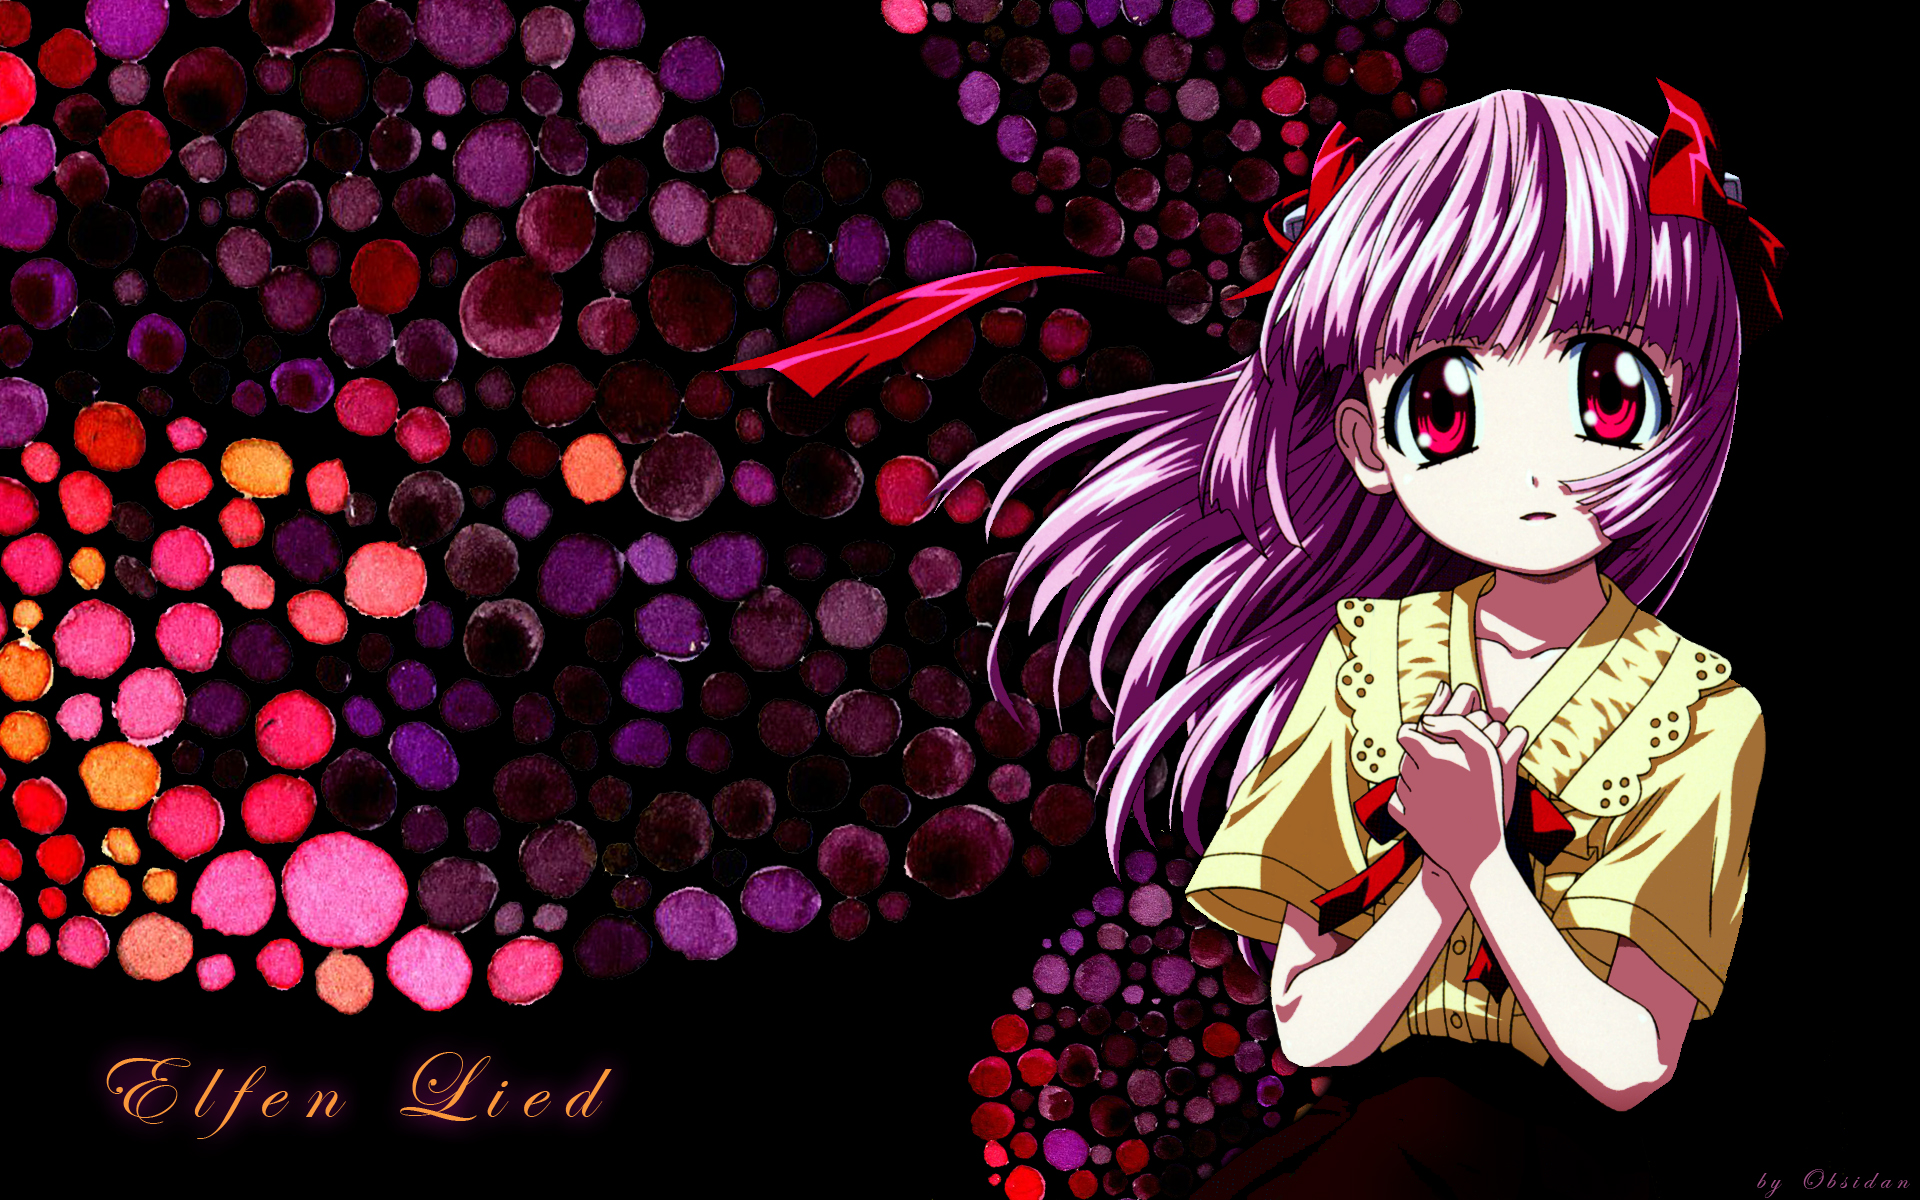 Anime character Lucy from Elfen Lied, standing against a dark background.